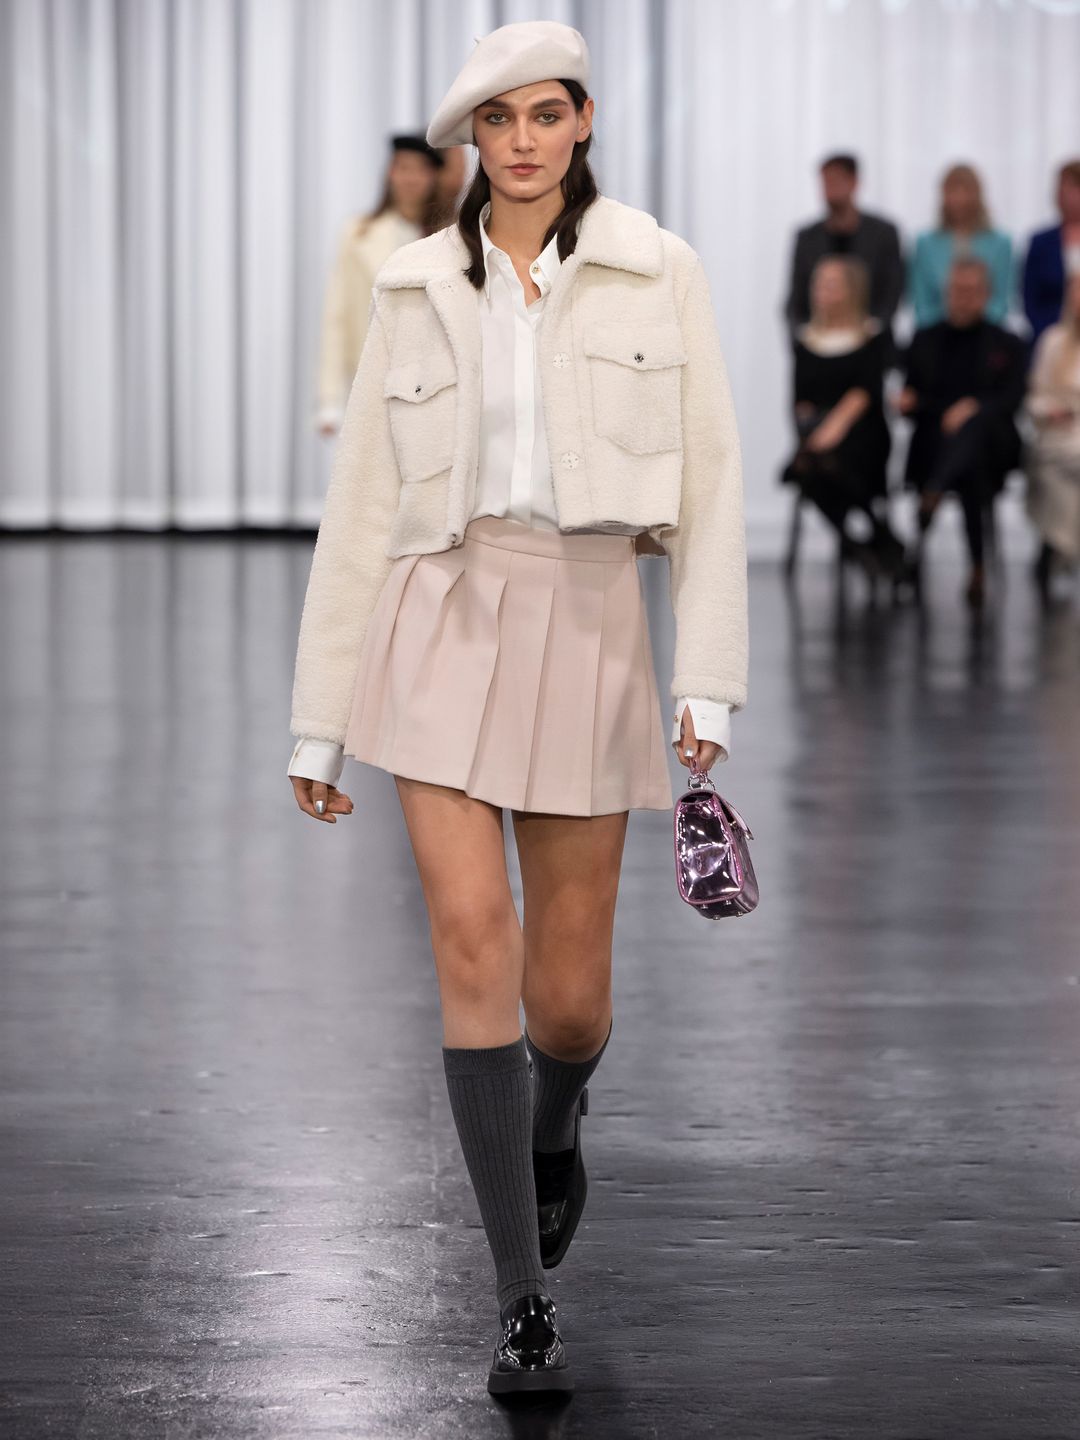 A model at Marc Cain wears a pleated skirt with a white crop jacket, beret, knee high socks and loafers